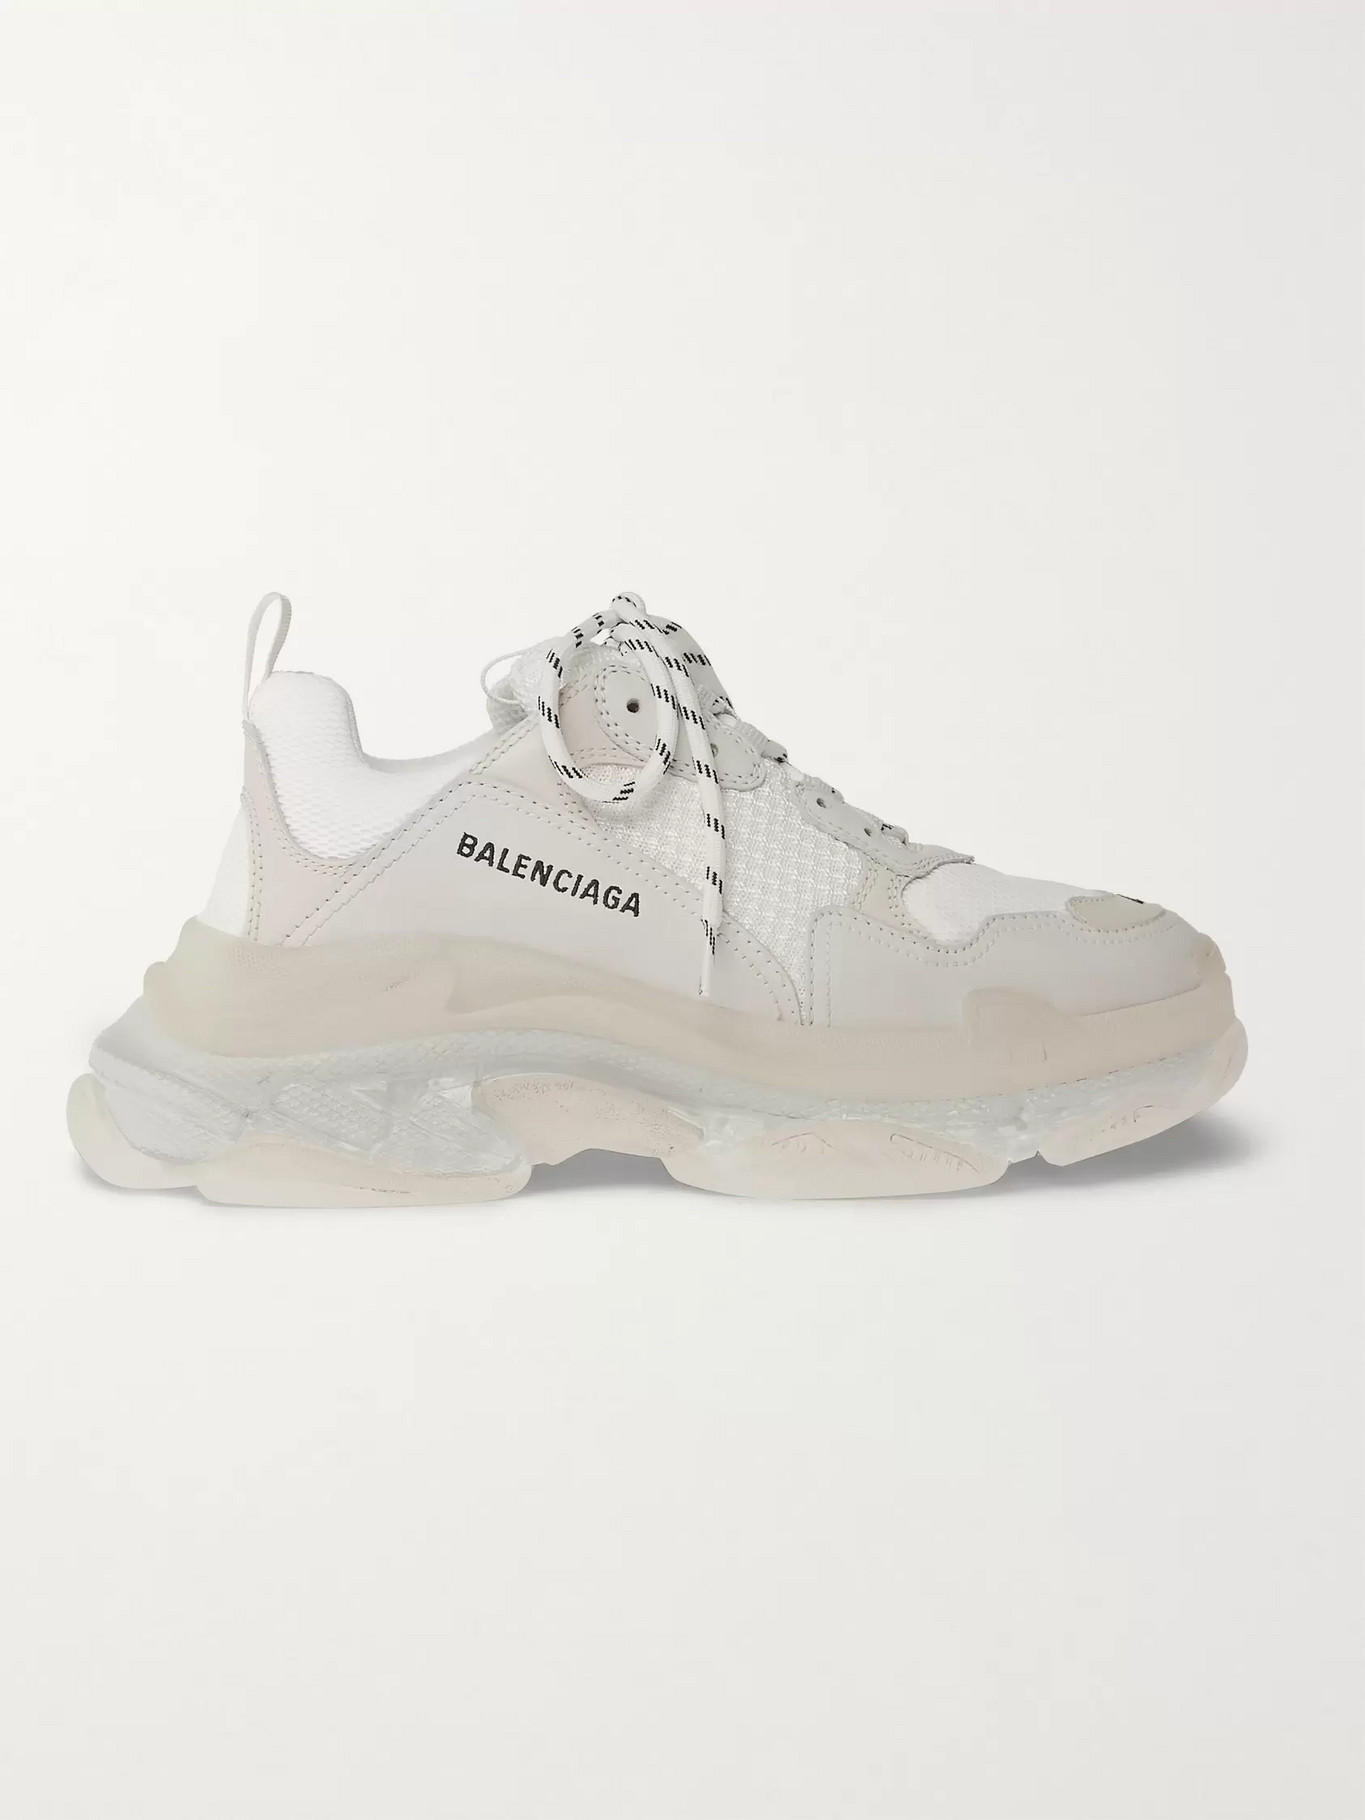 andesBalenciaga Triple S With Air Bubble Clear Sole